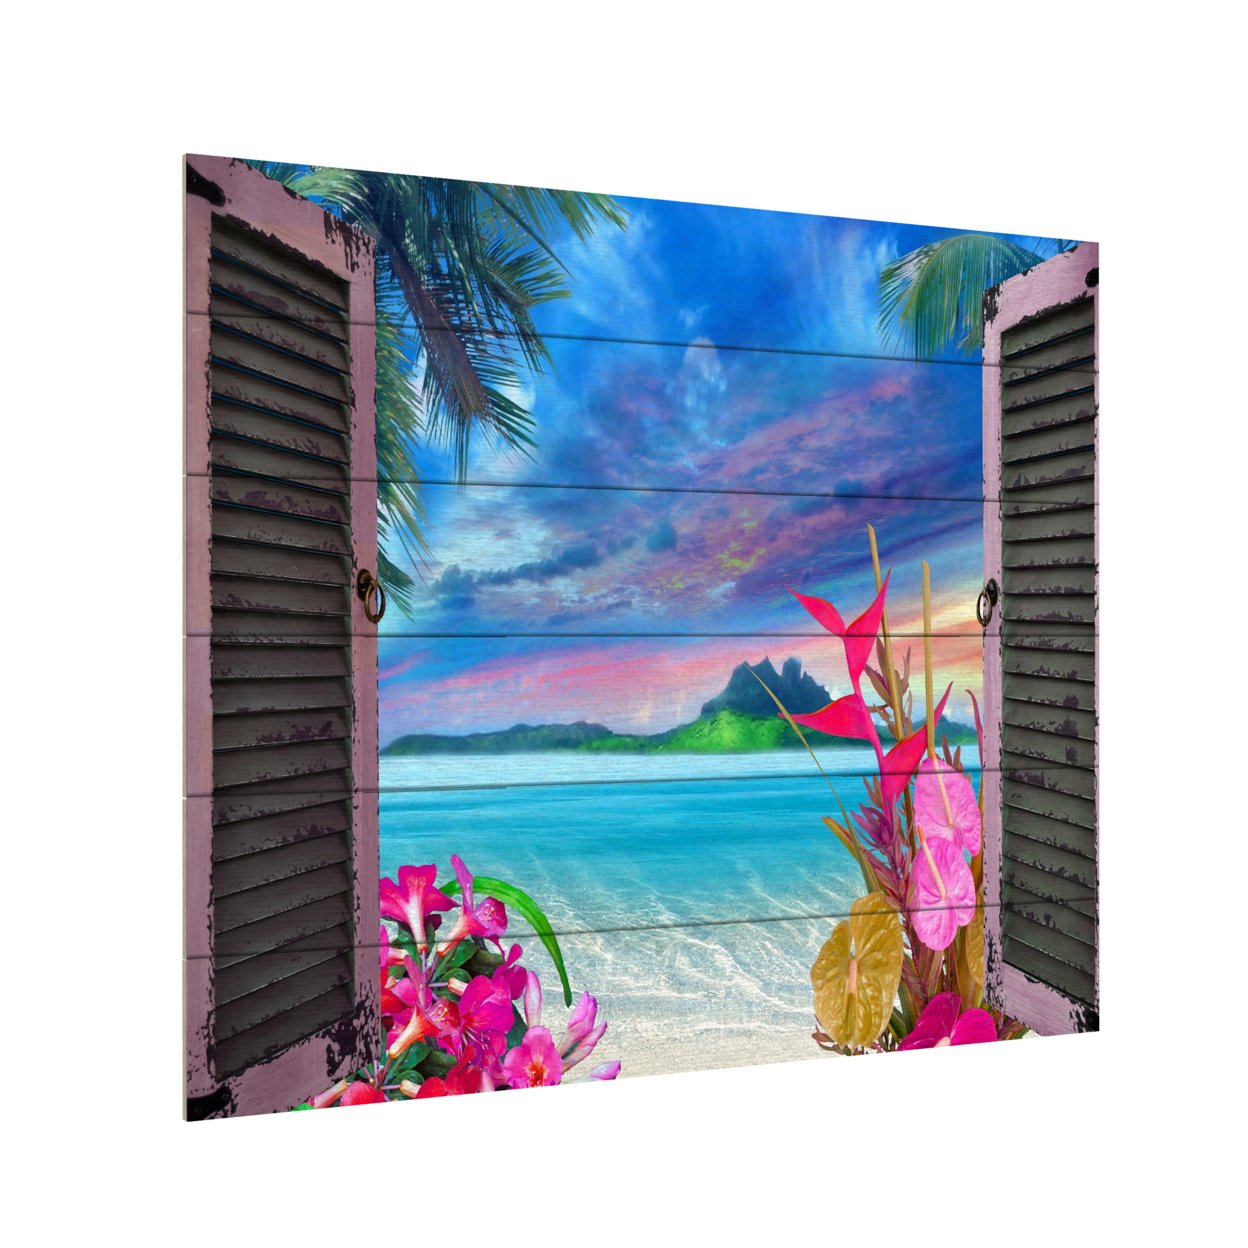 Wooden Slat Art 18 X 22 Inches Titled Window To Paradise VII Ready To Hang Home Decor Picture